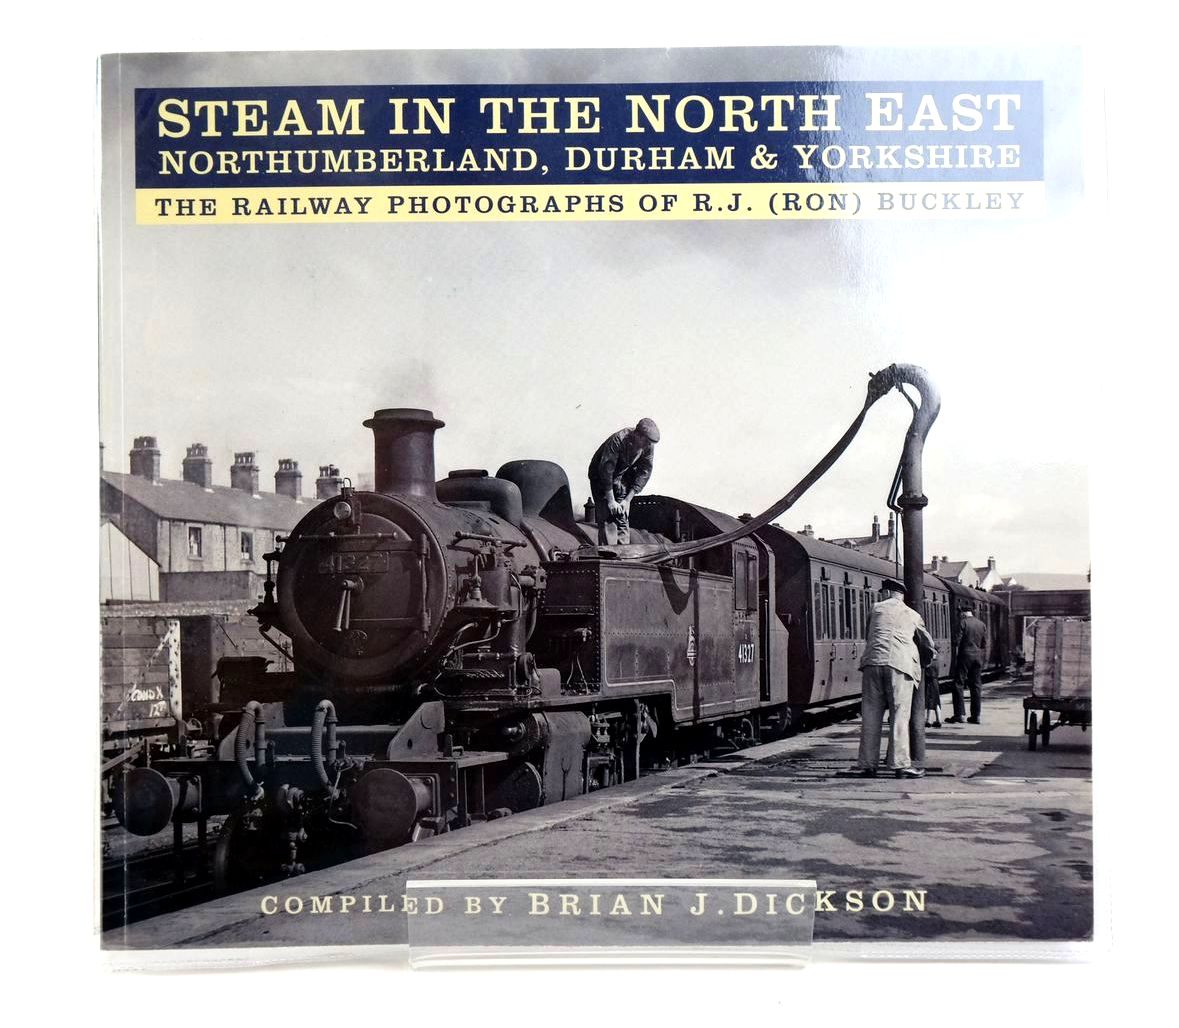 Photo of STEAM IN THE NORTH EAST NORTHUMBERLAND, DURHAM & YORKSHIRE: THE RAILWAY PHOTOGRAPHS OF R.J. (RON) BUCKLEY written by Dickson, Brian J. illustrated by Buckley, R.J. published by The History Press (STOCK CODE: 1321590)  for sale by Stella & Rose's Books